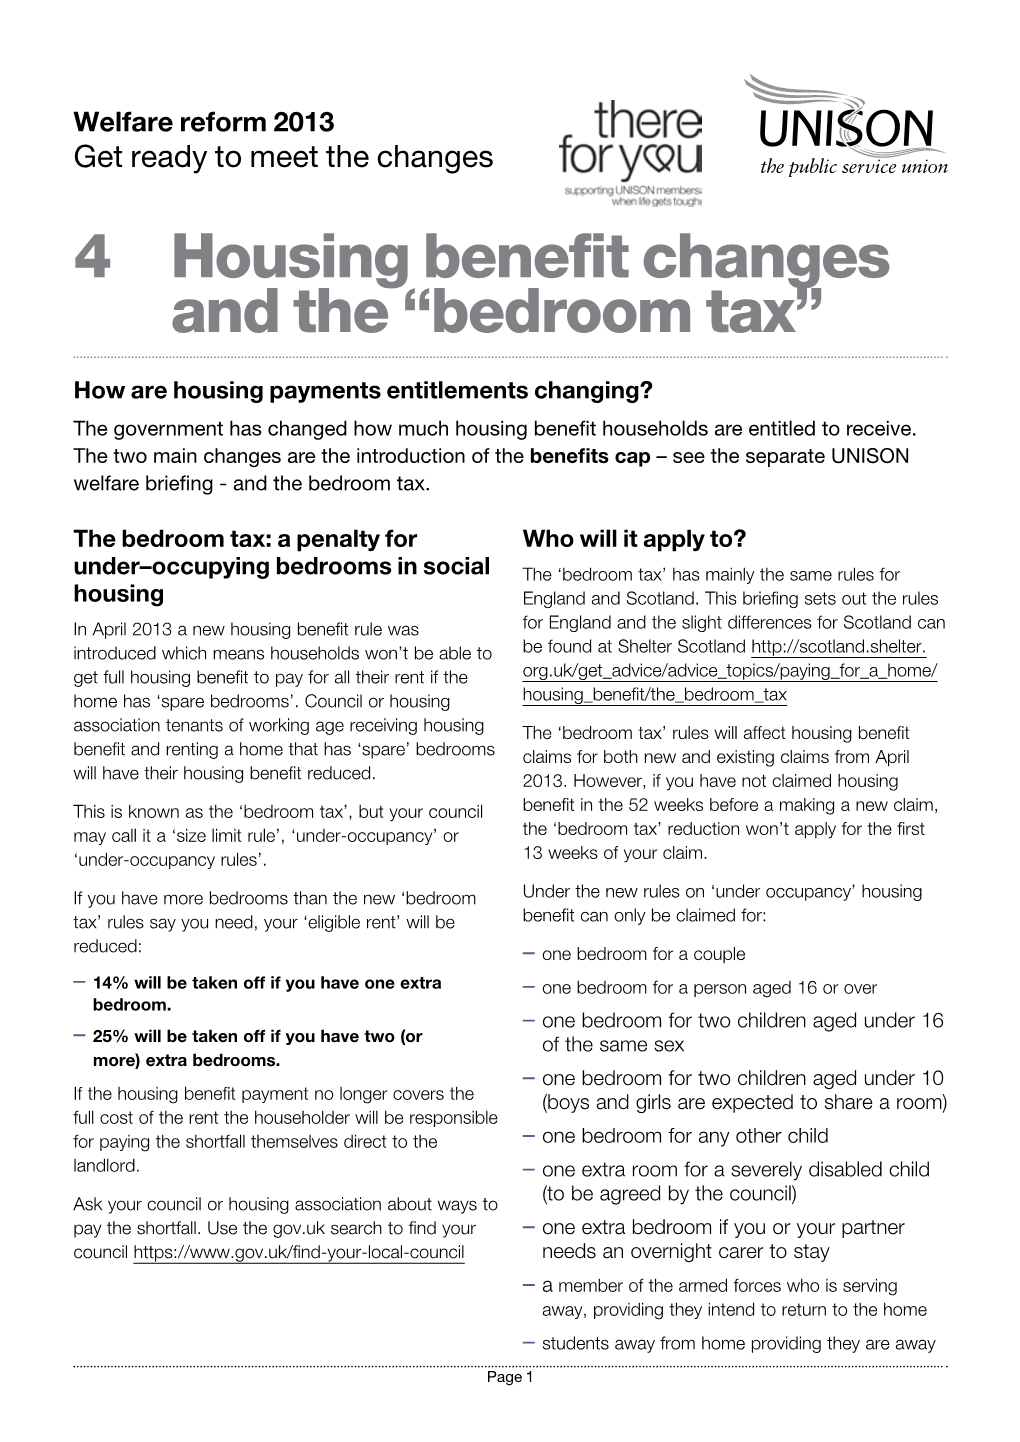 4 Housing Benefit Changes and the “Bedroom Tax”